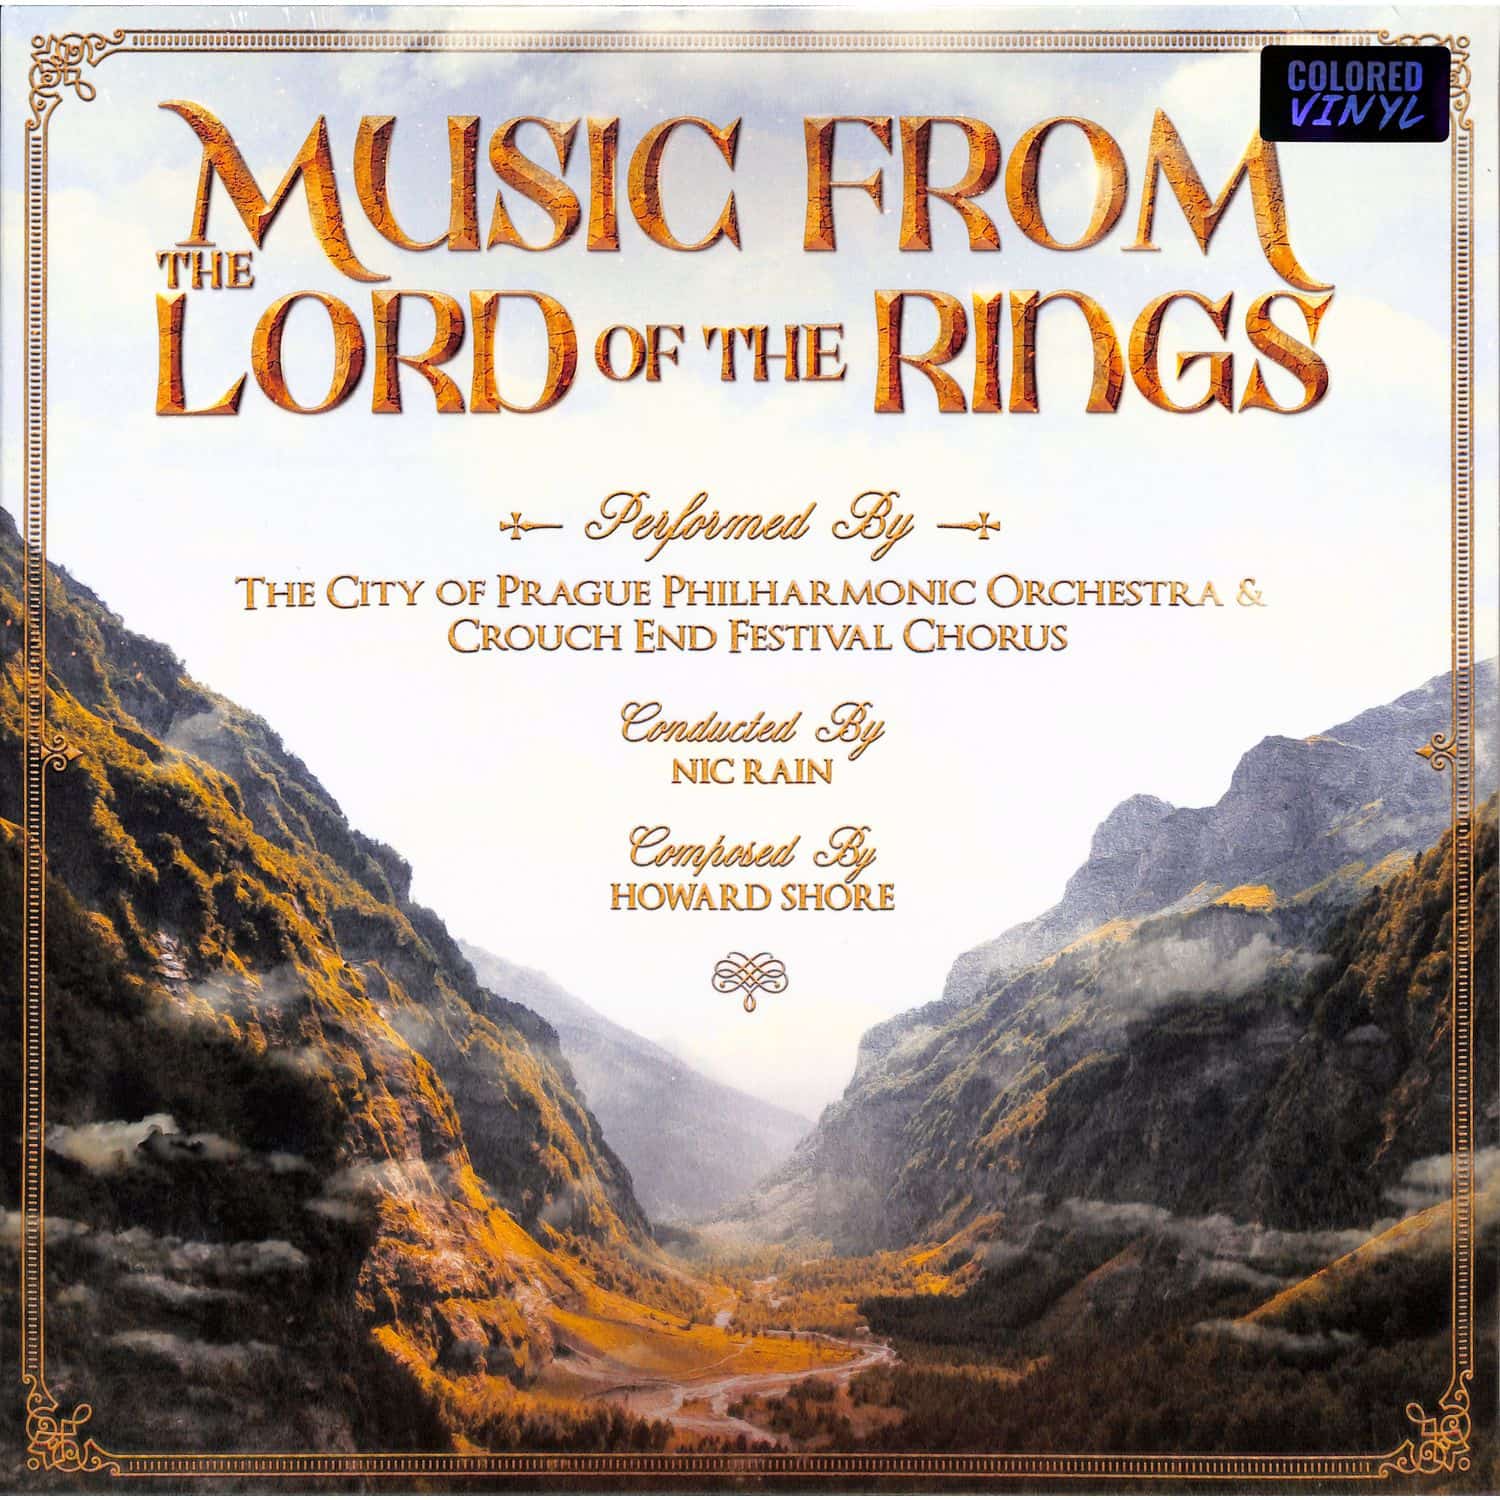 The City Of Prague Philharmonic Orchestra - MUSIC FROM THE LORDS OF THE RINGS TRILOGY 